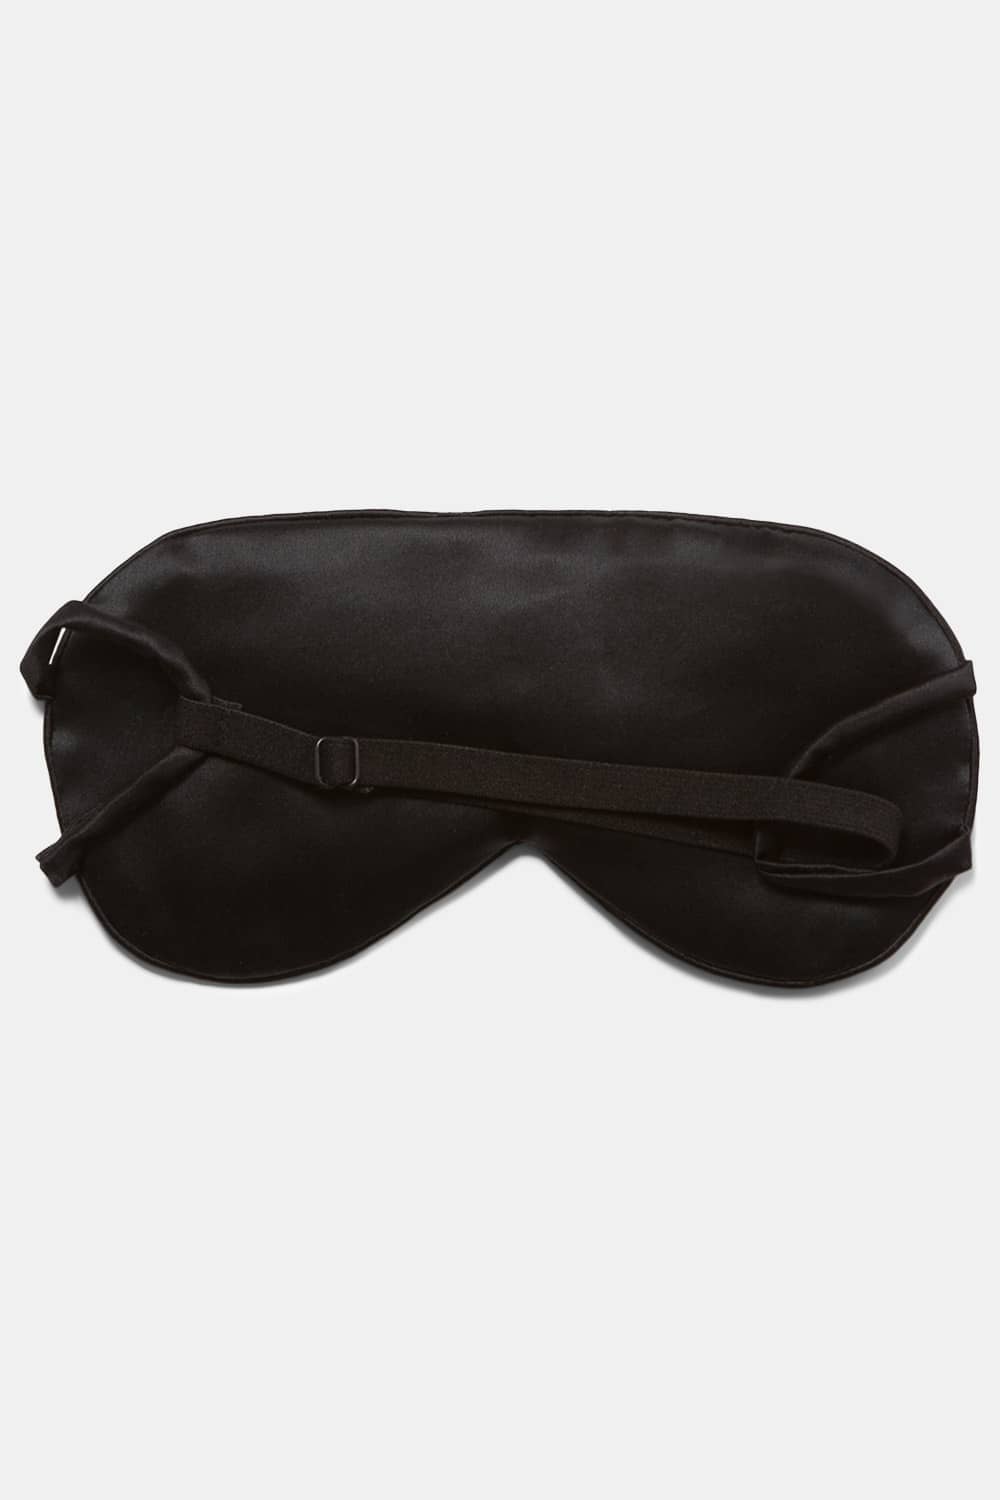 100% Mulberry Silk Therapeutic Sleep Mask - 25 Momme Beauty>Masks Fishers Finery Black